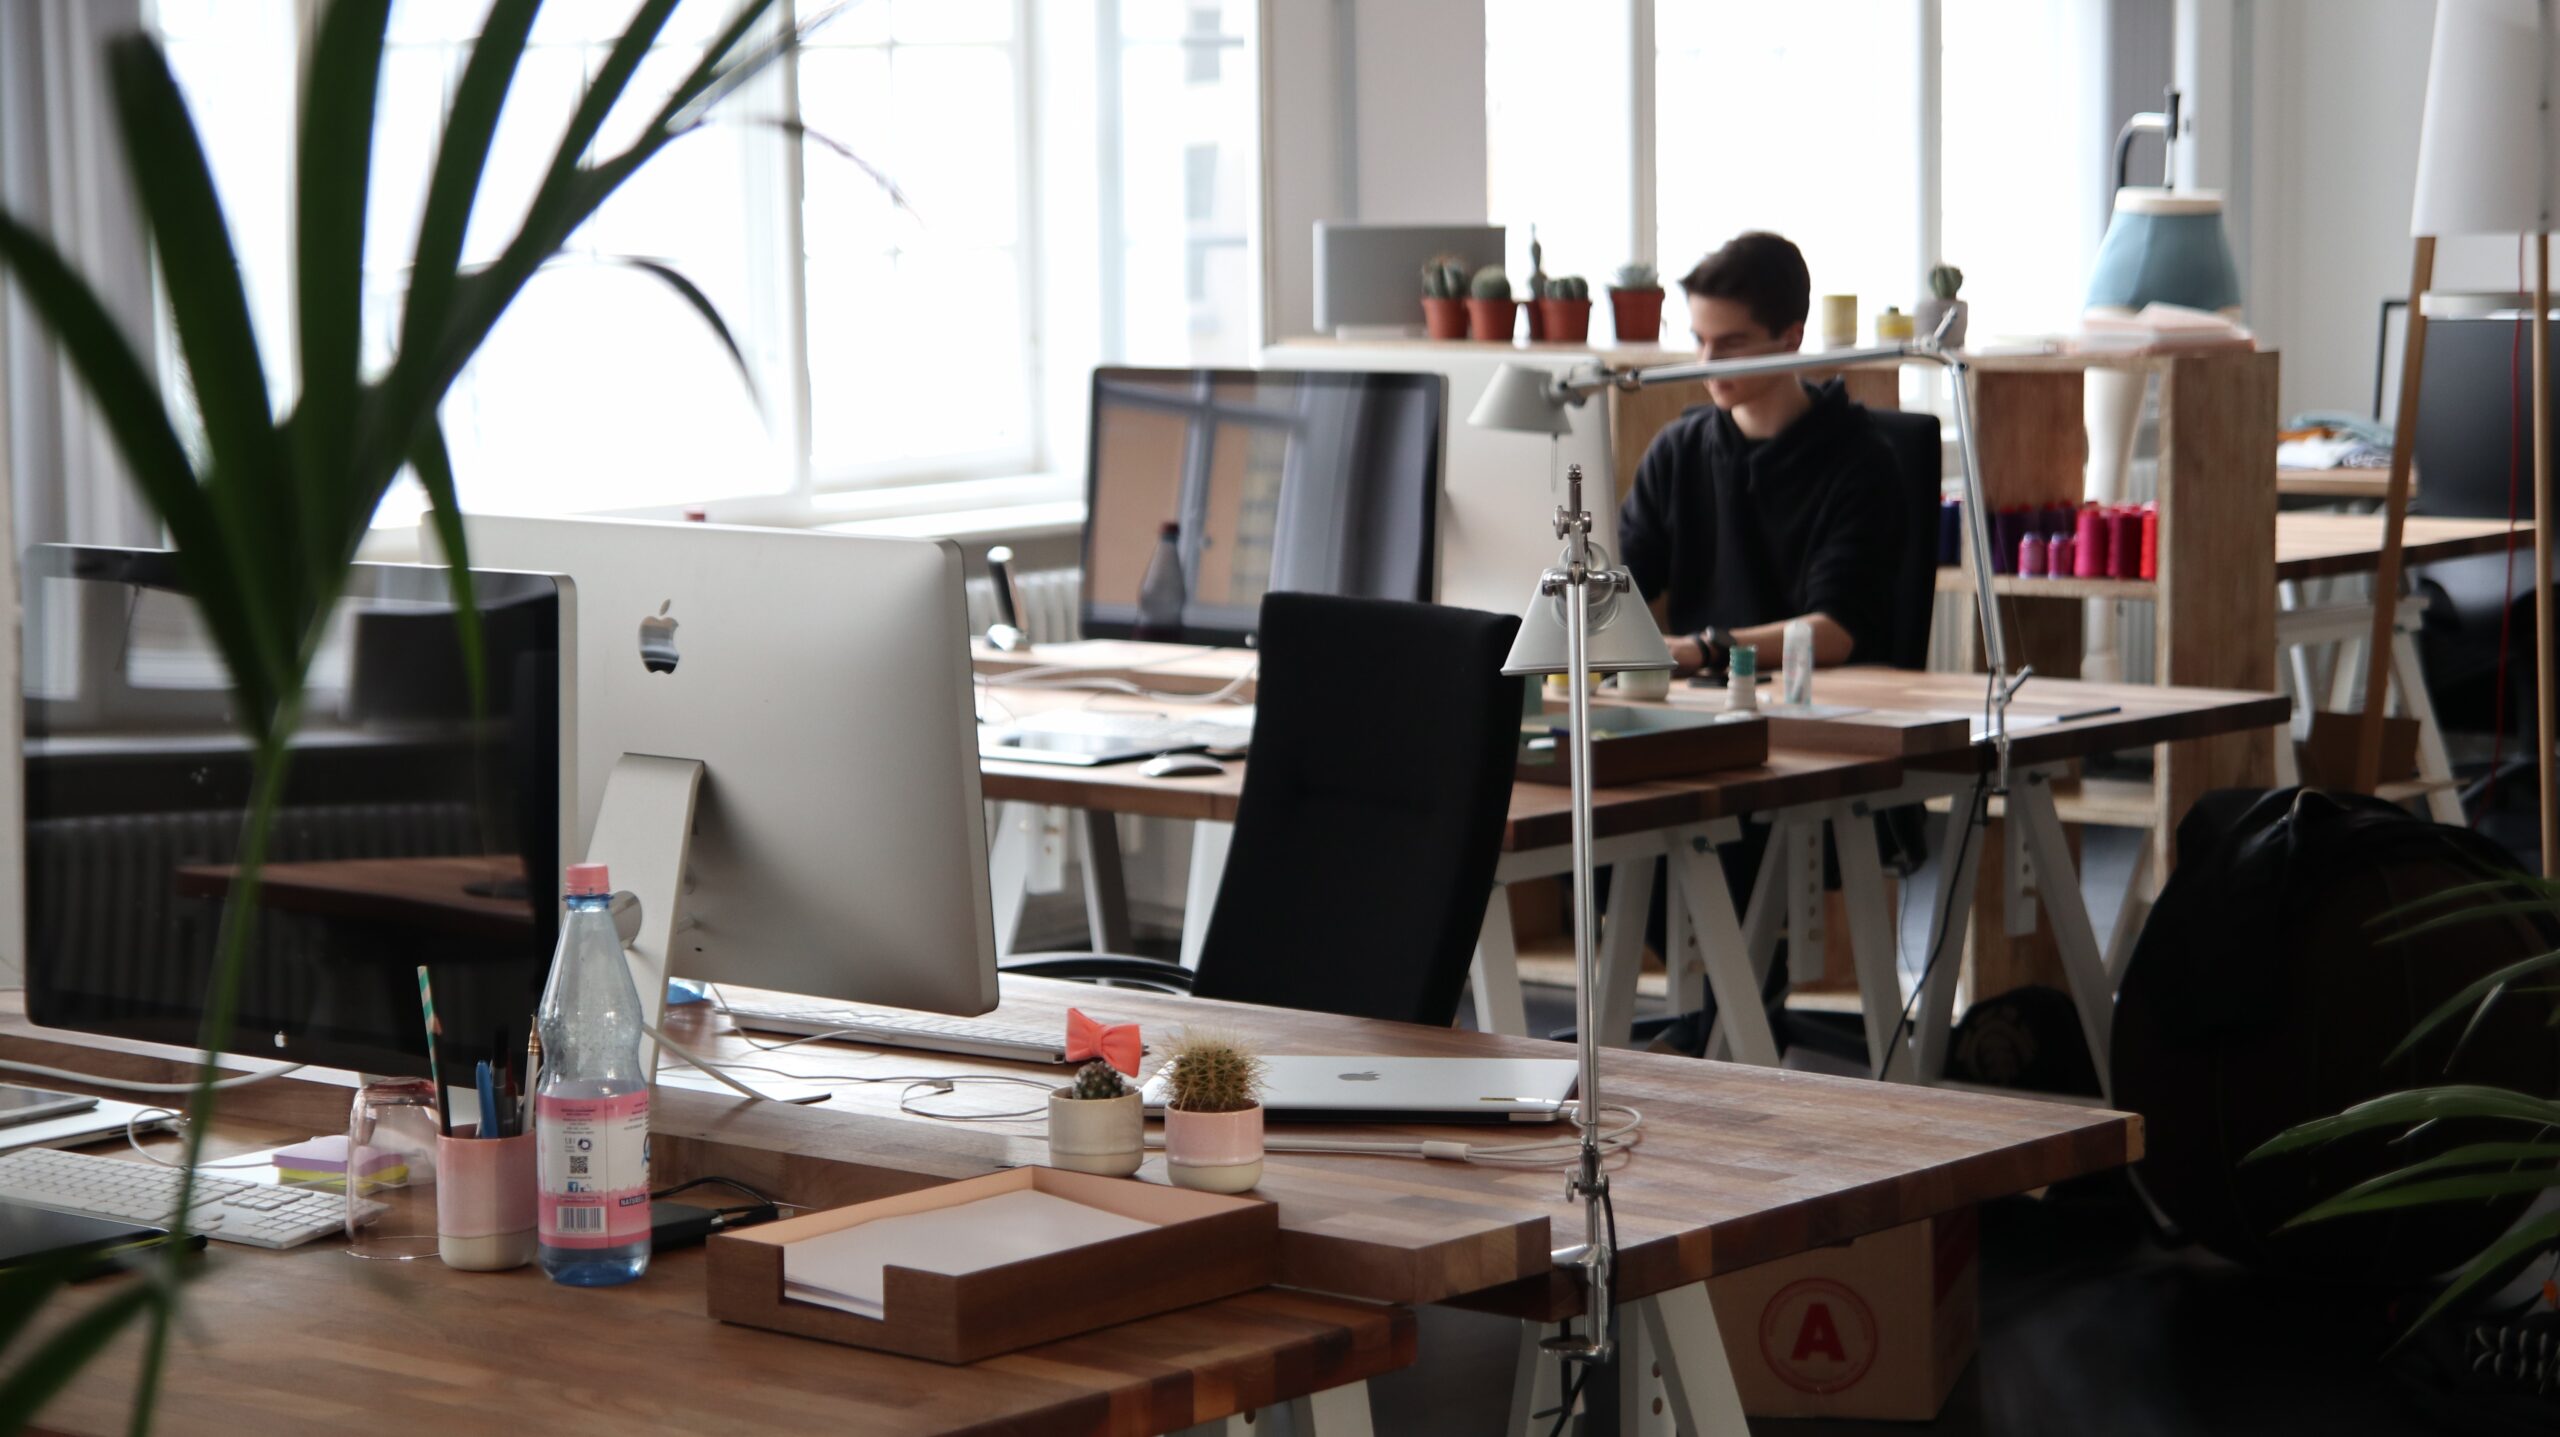 Which Office Space is Better: Cubicles or Open Concept?